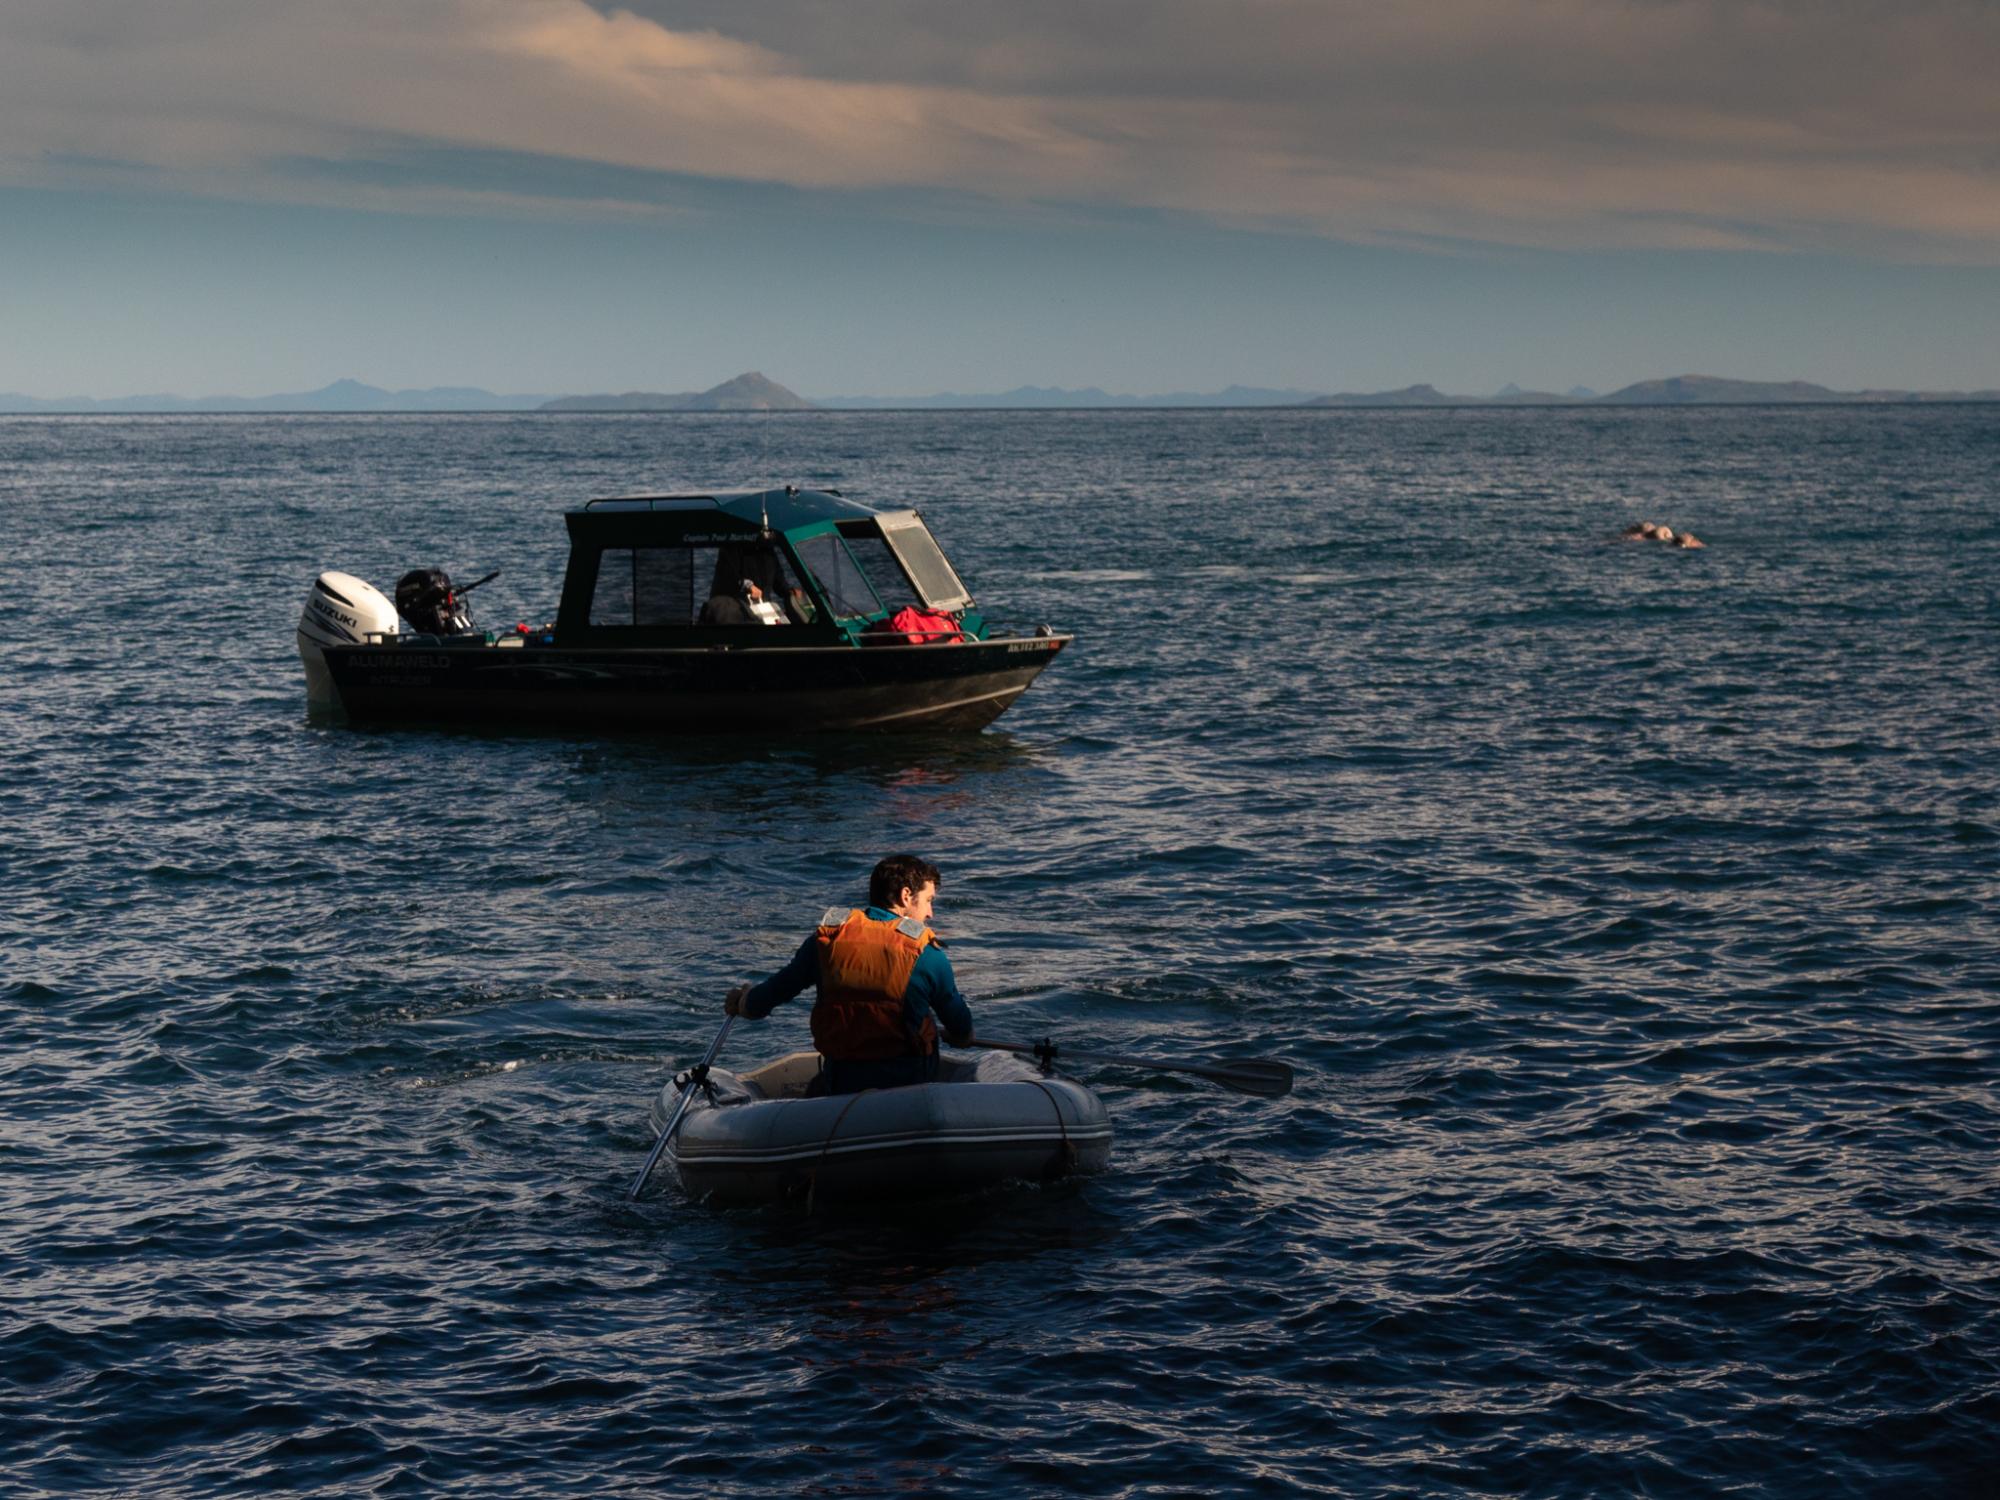 Departing from Round Island, Devin Johnson (the writer/photographer&rsquo;s brother) rows to shore to shuttle more gear to Paul Markoff&rsquo;s boat. Because the boat itself cannot come all the way to shore, arrivals and departures from the island require exceptionally calm sea conditions.